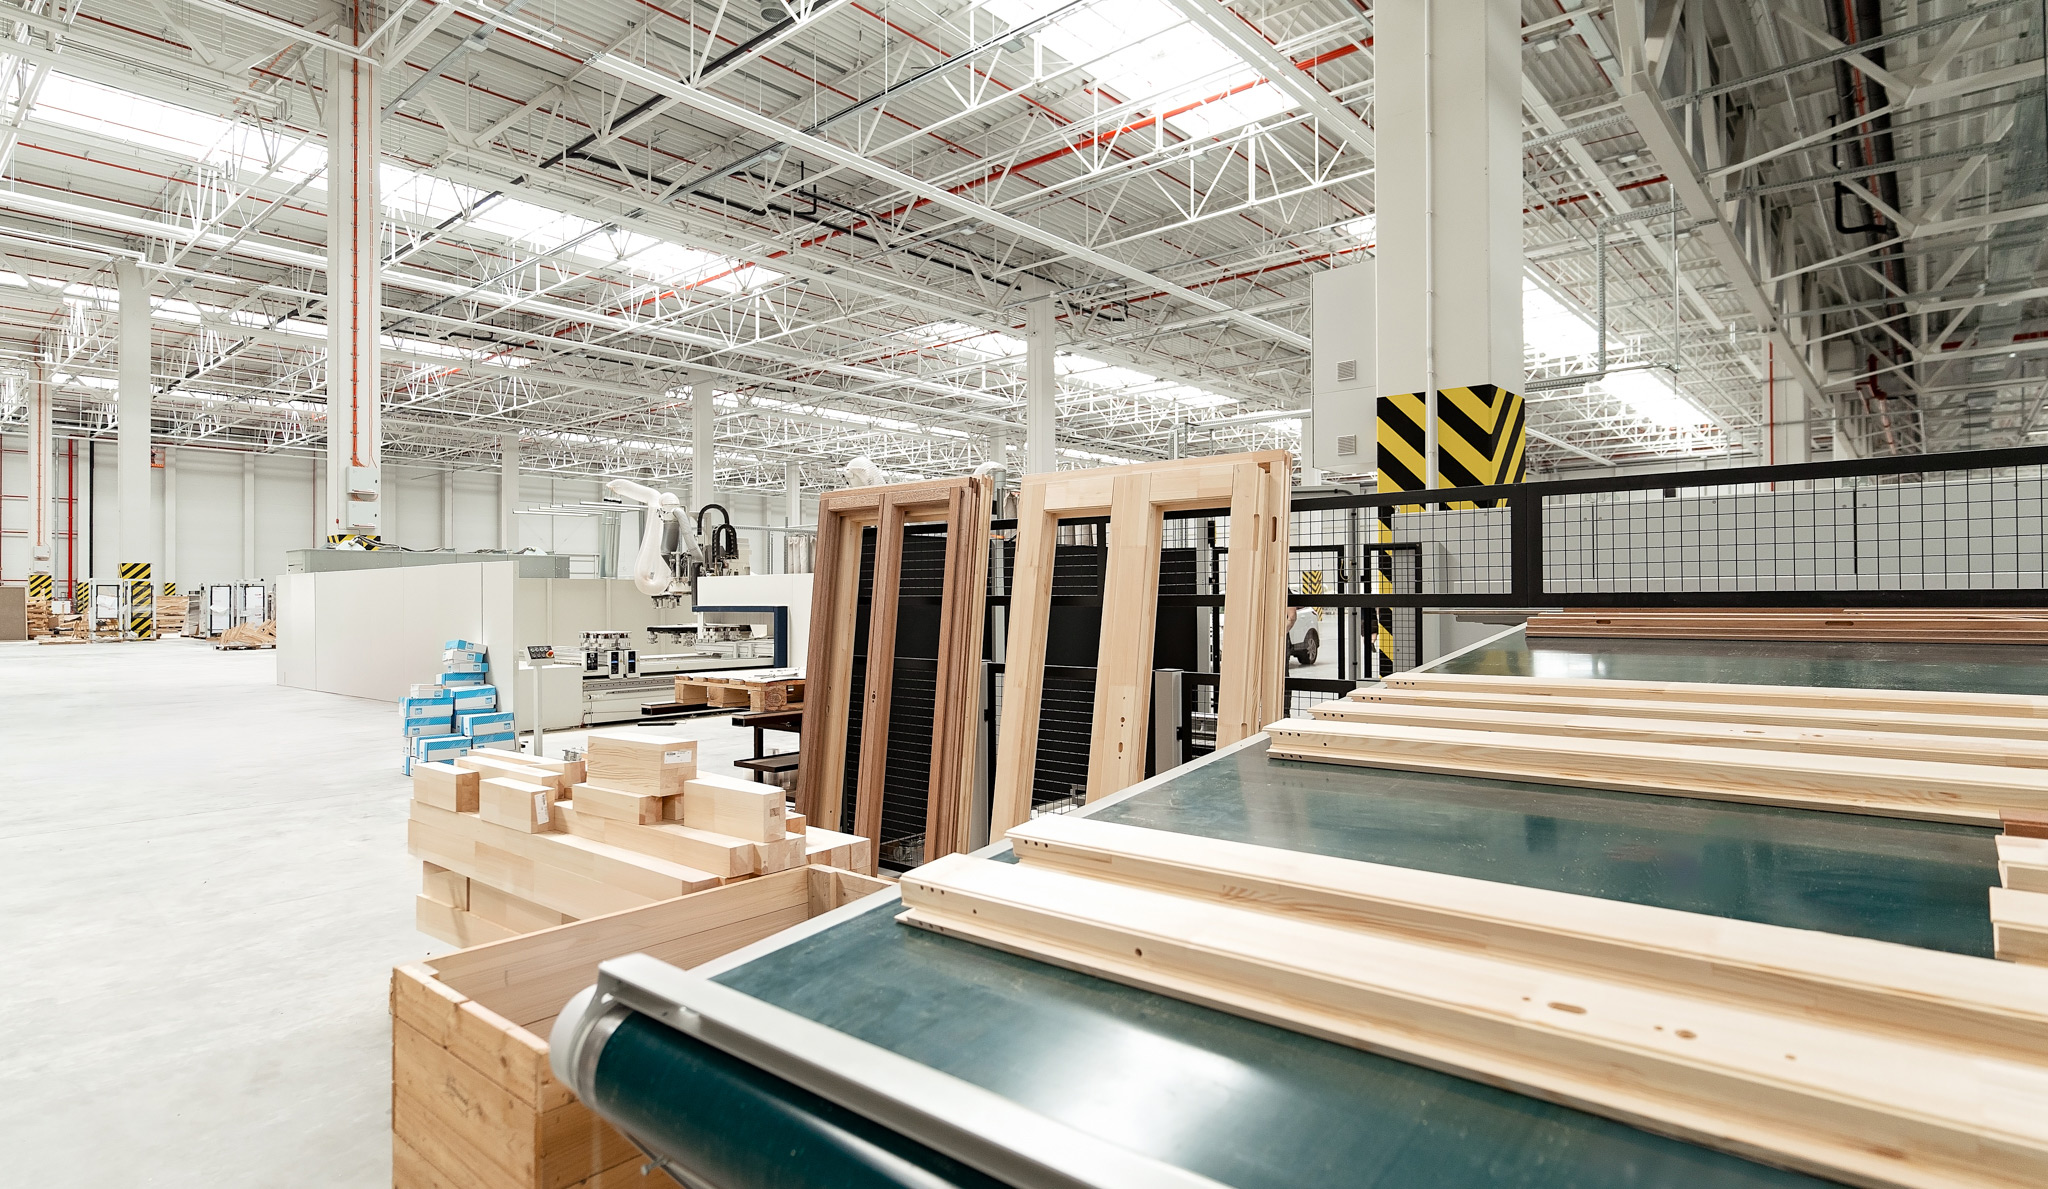 In July, we launched a production plant in Kędzierzyn-Koźle. We have increased our production capacities – this location will specialize in the production of wooden joinery. It also houses a scantling warehouse.